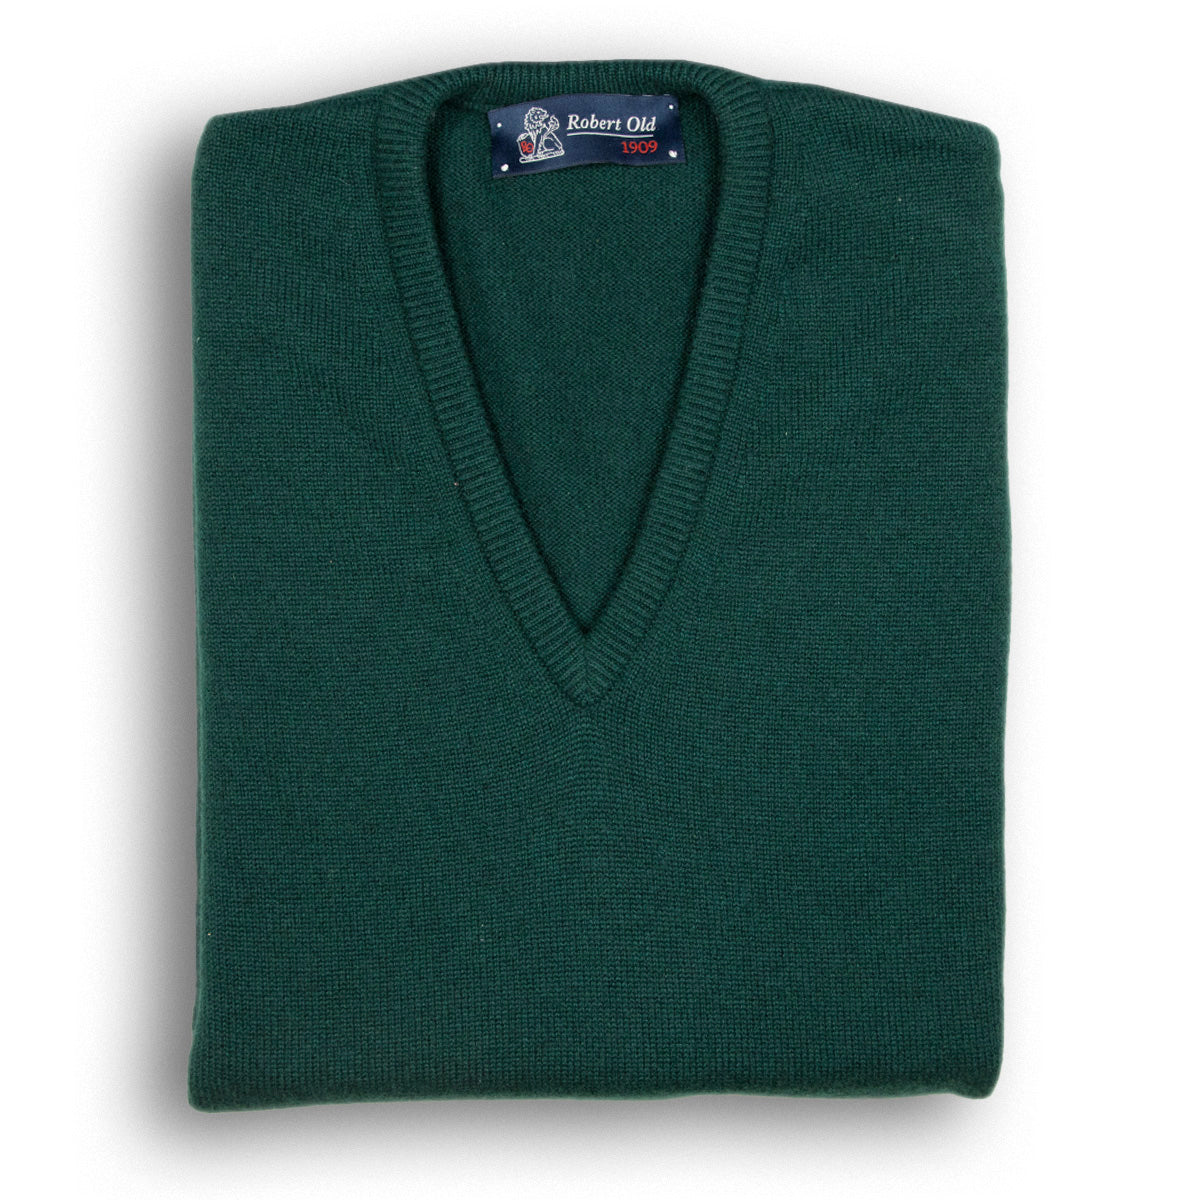 Holly Green Tobermorey 4ply V-Neck Cashmere Sweater  Robert Old Holly UK 36" 